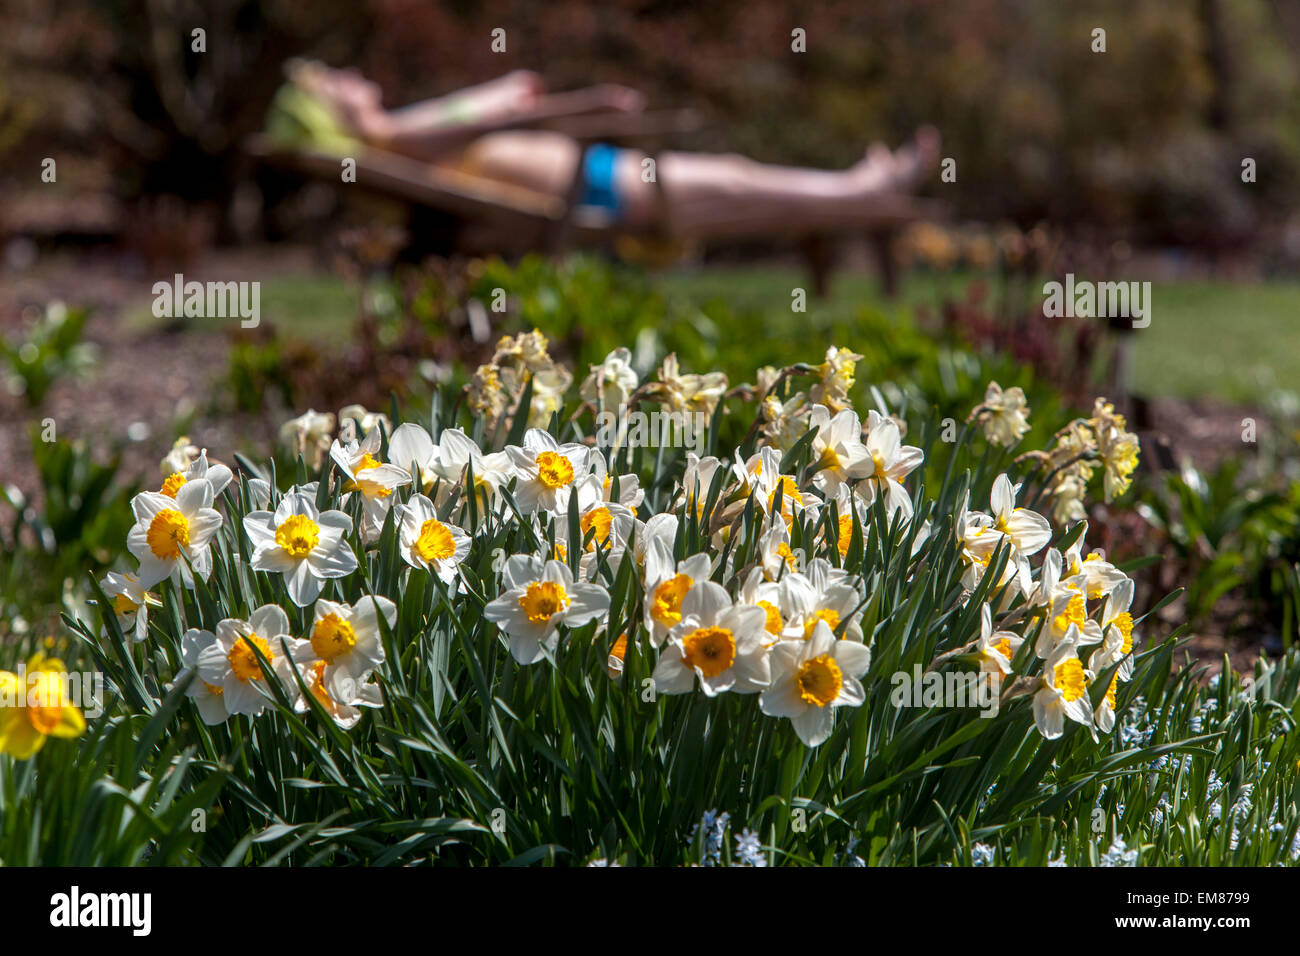 Sunbathing woman in the early spring garden, Daffodils lawn garden scene spring woman narcissus modern Stock Photo